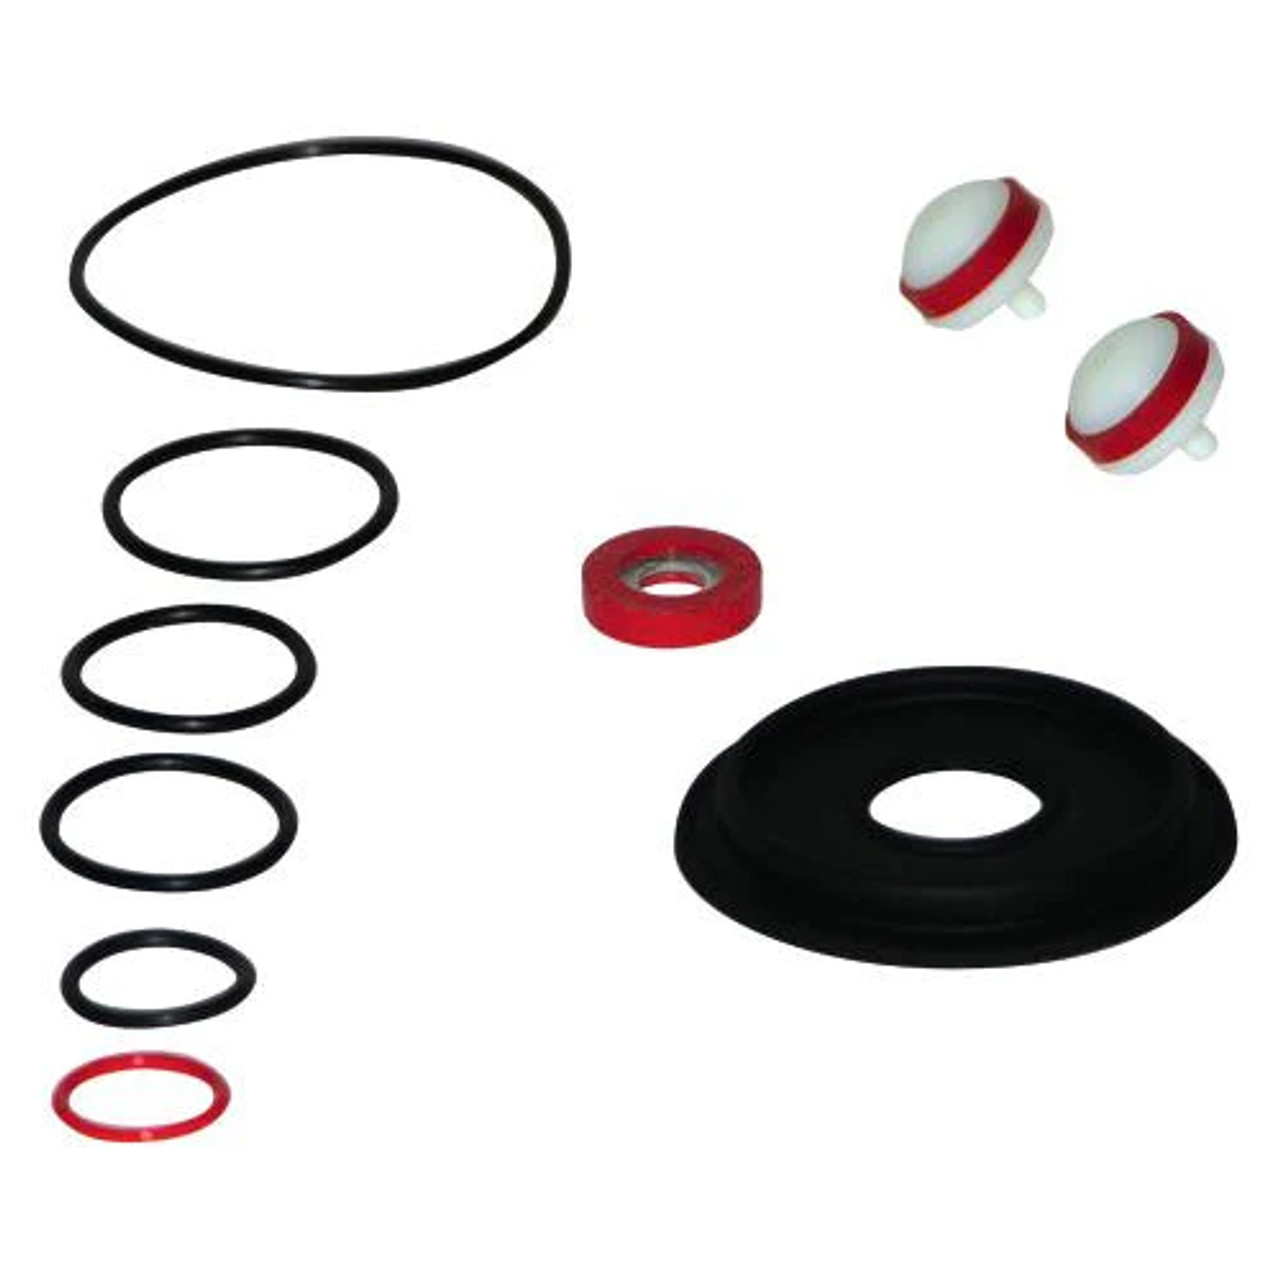 Total Rubber Kit for a 009
RK 009 RT 1/4"-1/2"